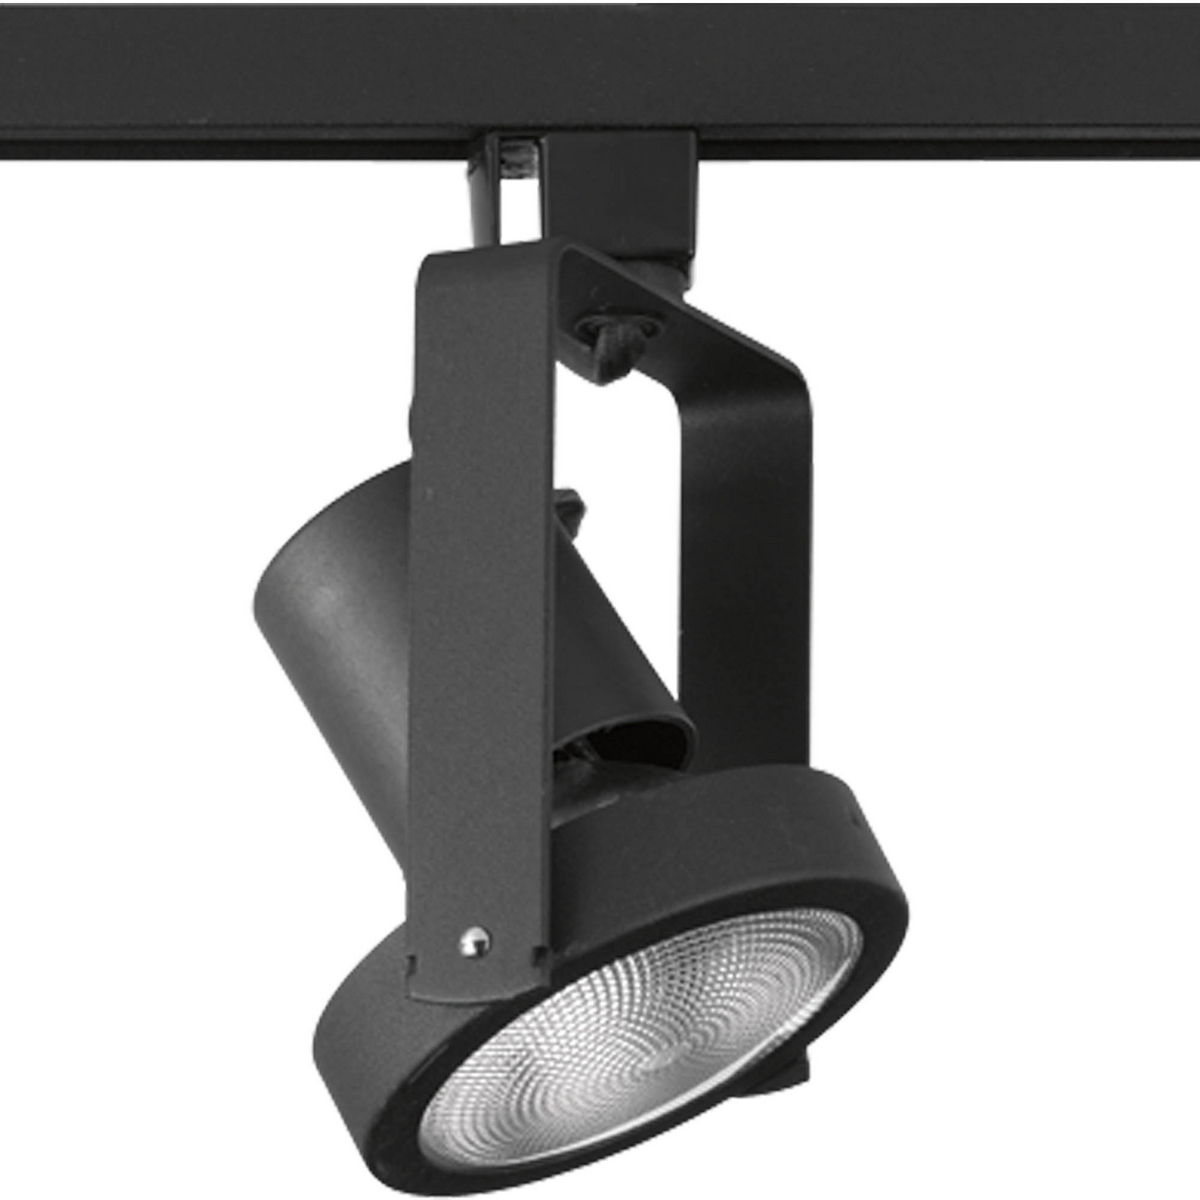 Black high tech Alpha Trak track head with 360 degree horizontal rotation and 90 degree vertical rotation. Heads can be easily repositioned on the track to provide lighting in different areas of the room. Excellent for both residential and retail locations. Use one 75W PAR 30 bulb.